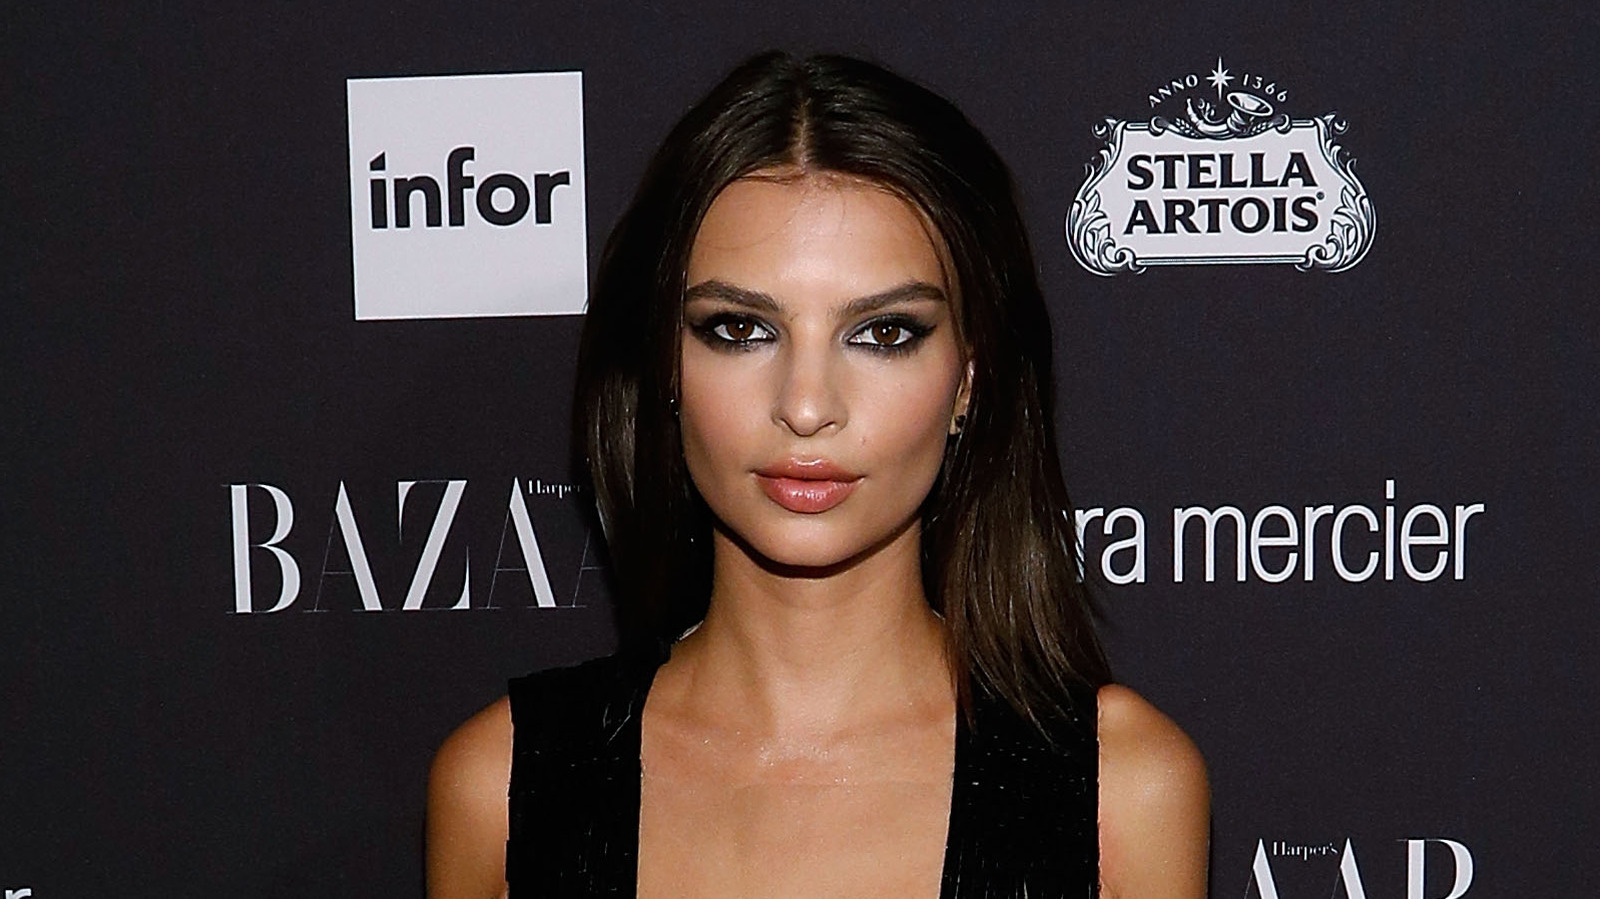 Emily Ratajkowski's Most Inappropriate Outfits To Date